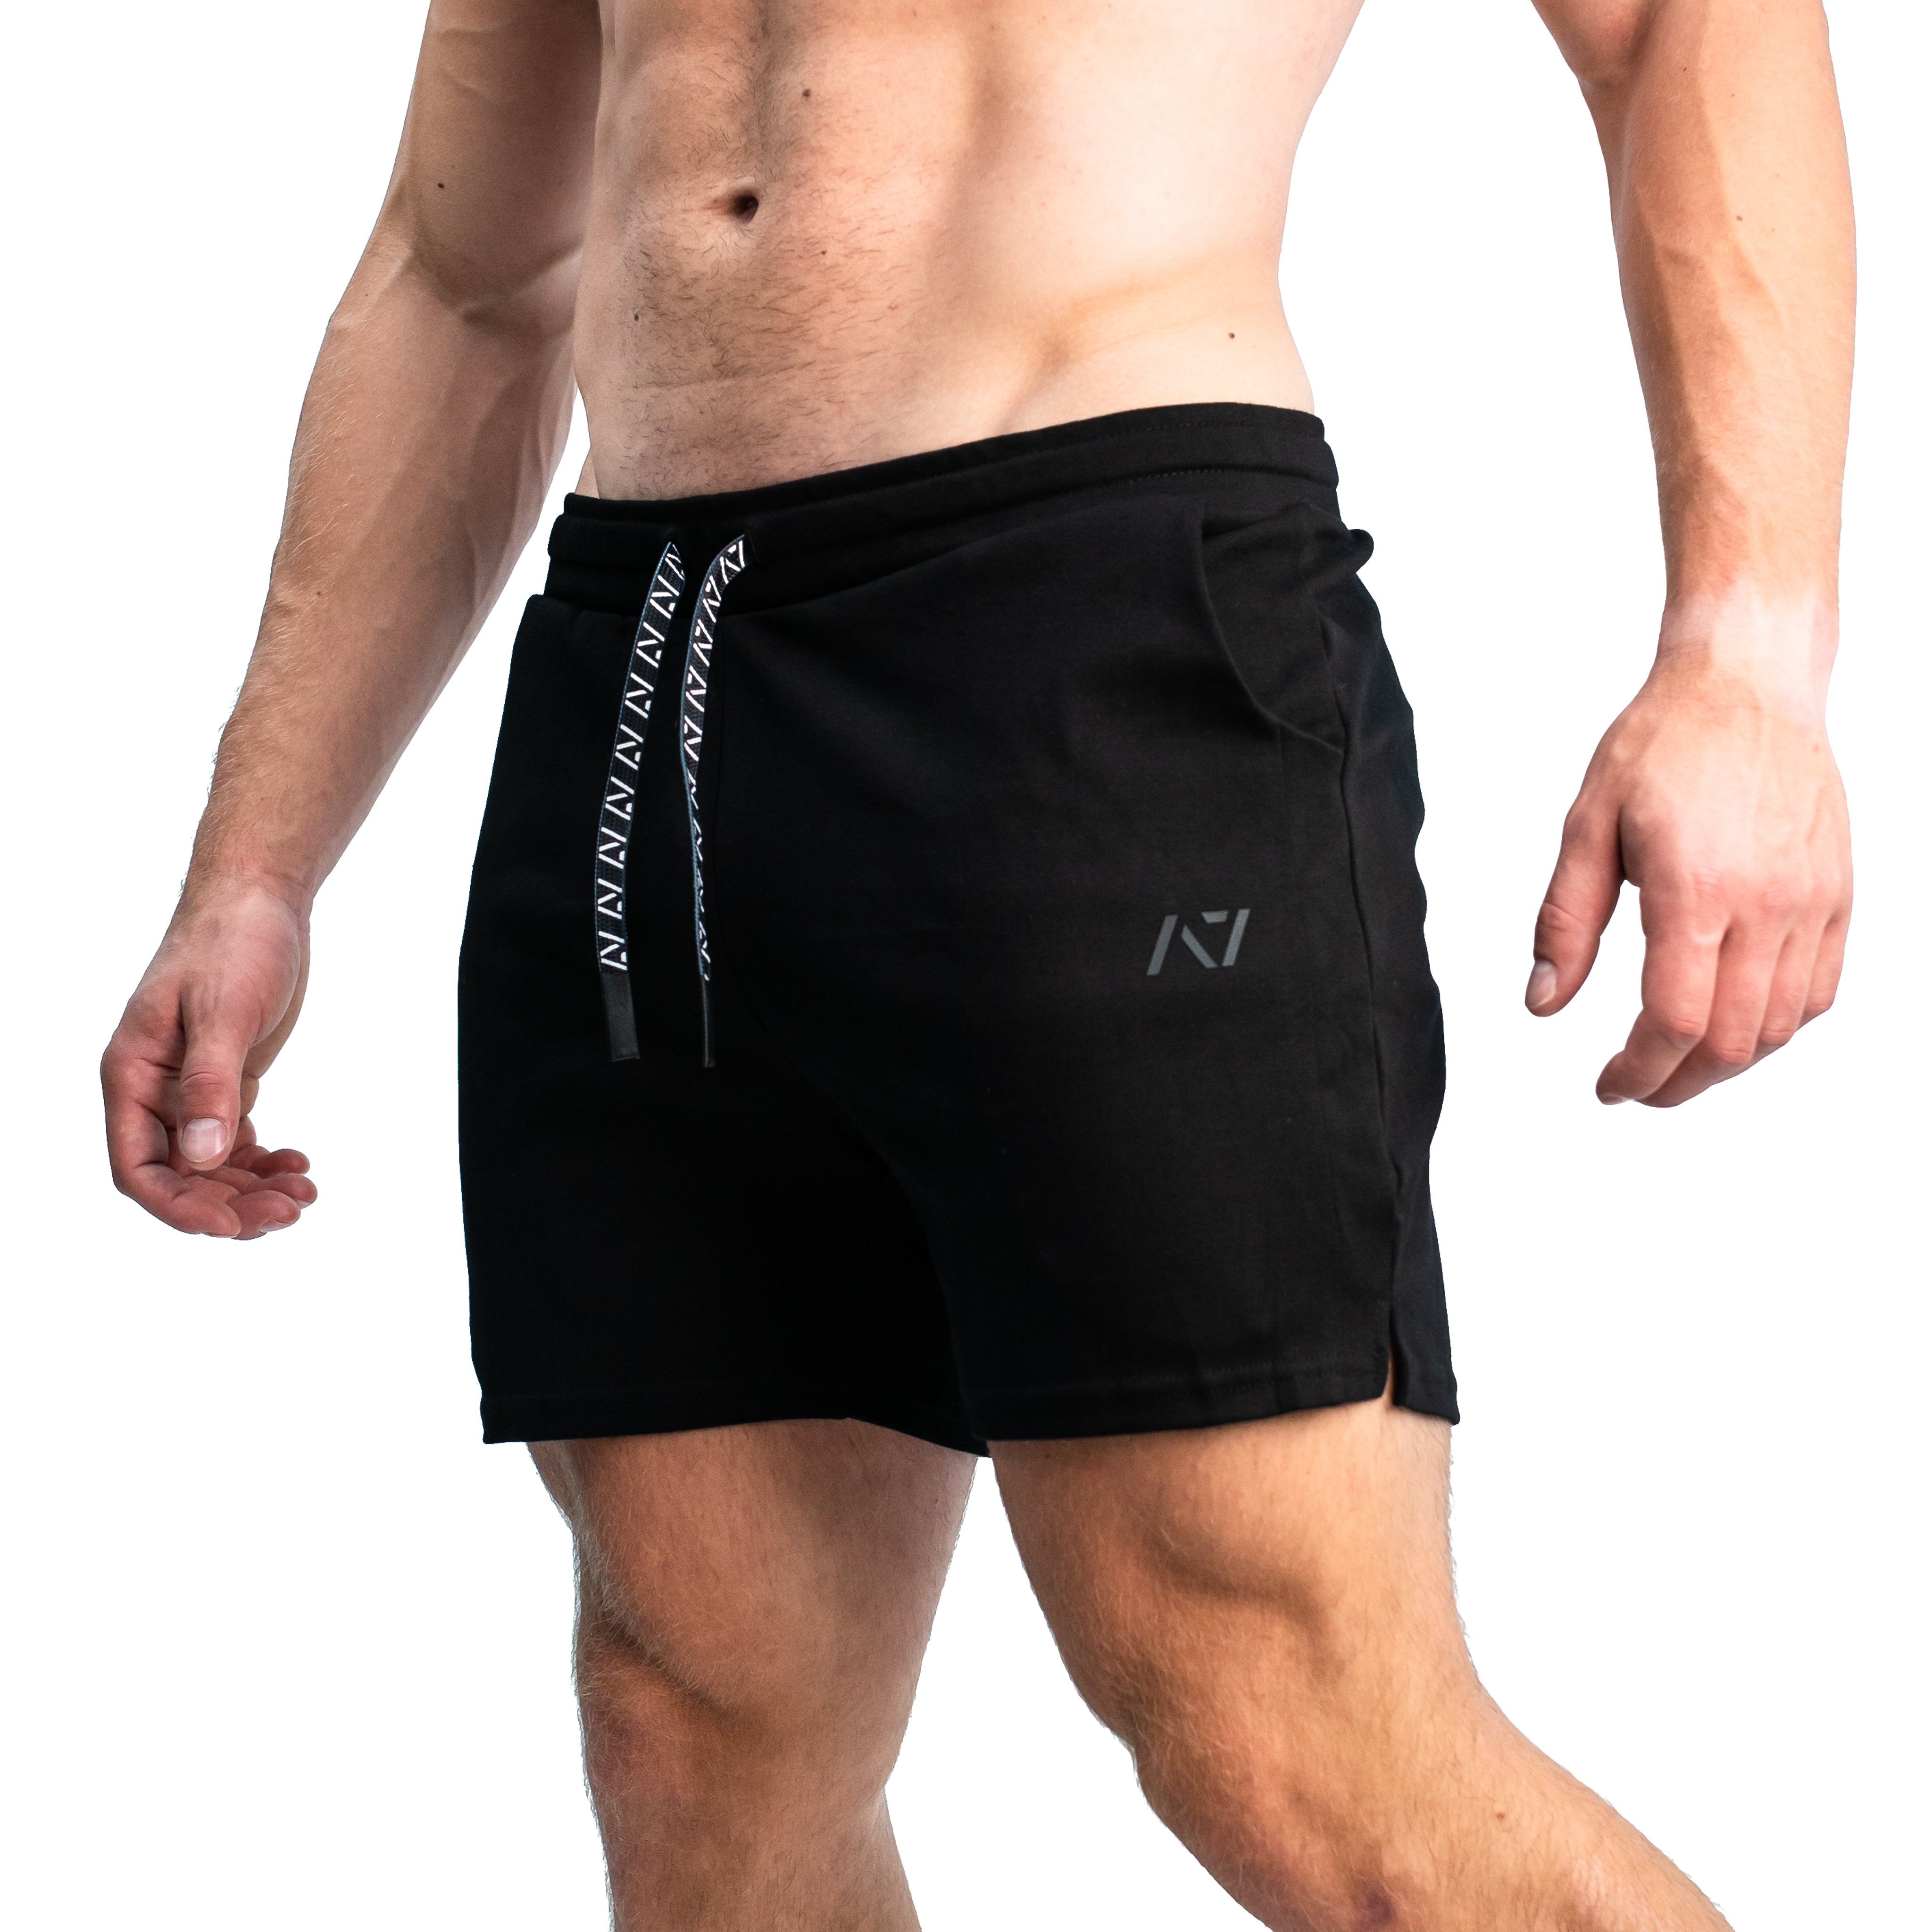 A7 Moxie Shorts are part of the A7 balance collection which combines comfort and aesthetics. The pieces in this collection are made with comfortable fabrics and minimal logos to create a simple, yet impactful look. The Moxie Shorts have 4-way hybrid stretch material to move with your unique shape. Purchase A7 Moxie Shorts from A7 Europe. Purchase A7 Moxie shorts from A7 UK. Available in UK and Europe including France, Italy, Germany, the Netherlands, Sweden and Poland.